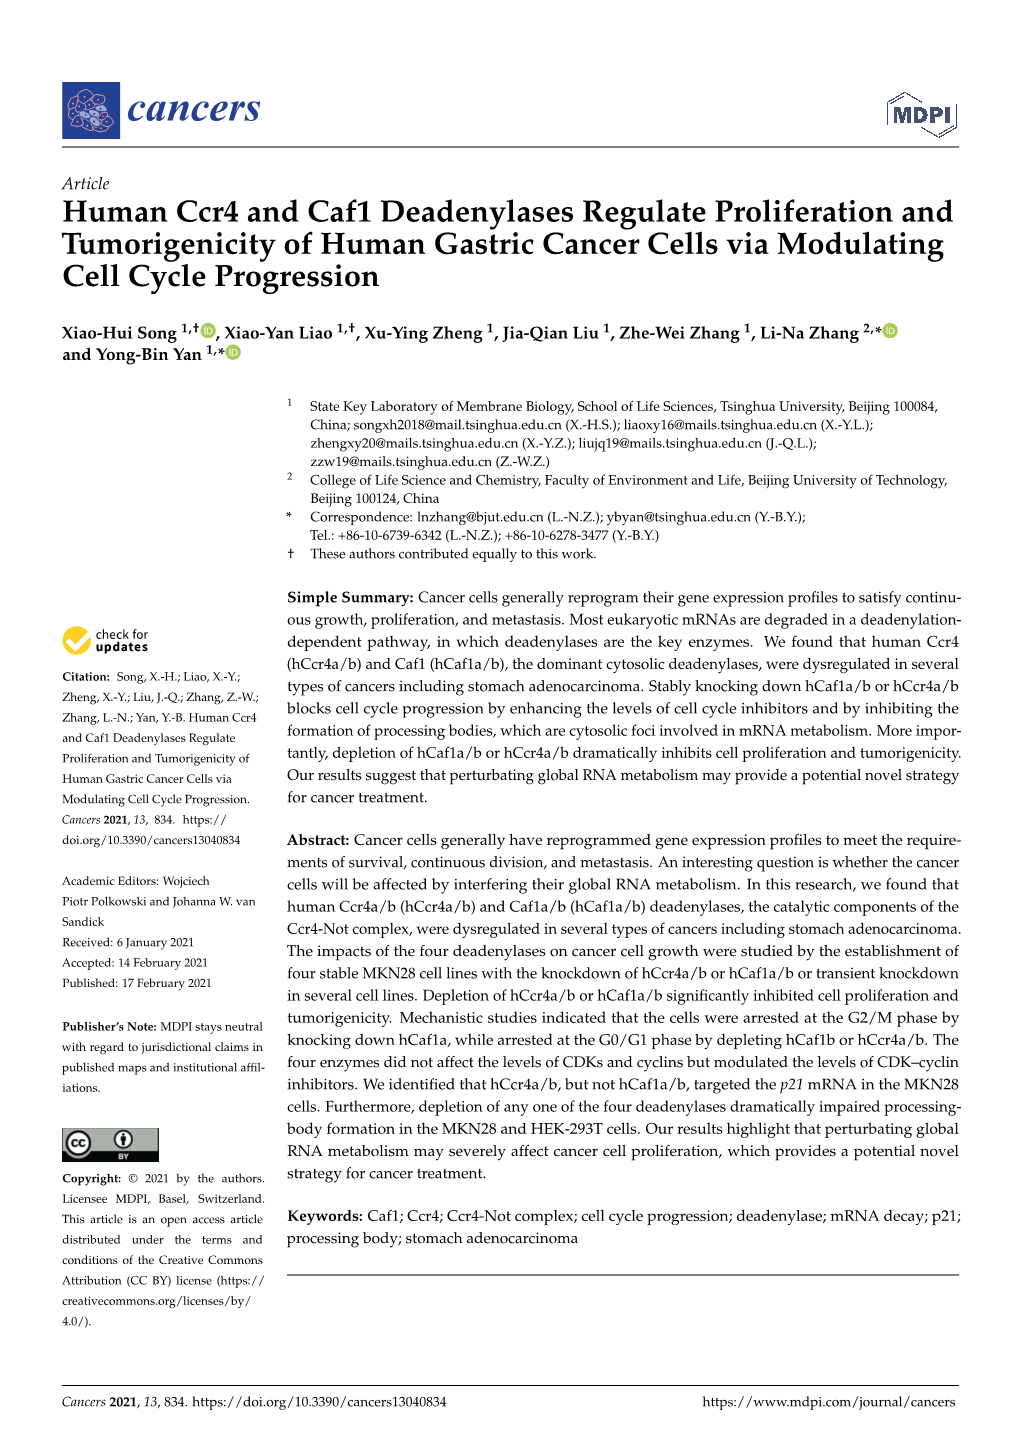 Human Ccr4 and Caf1 Deadenylases Regulate Proliferation and Tumorigenicity of Human Gastric Cancer Cells Via Modulating Cell Cycle Progression